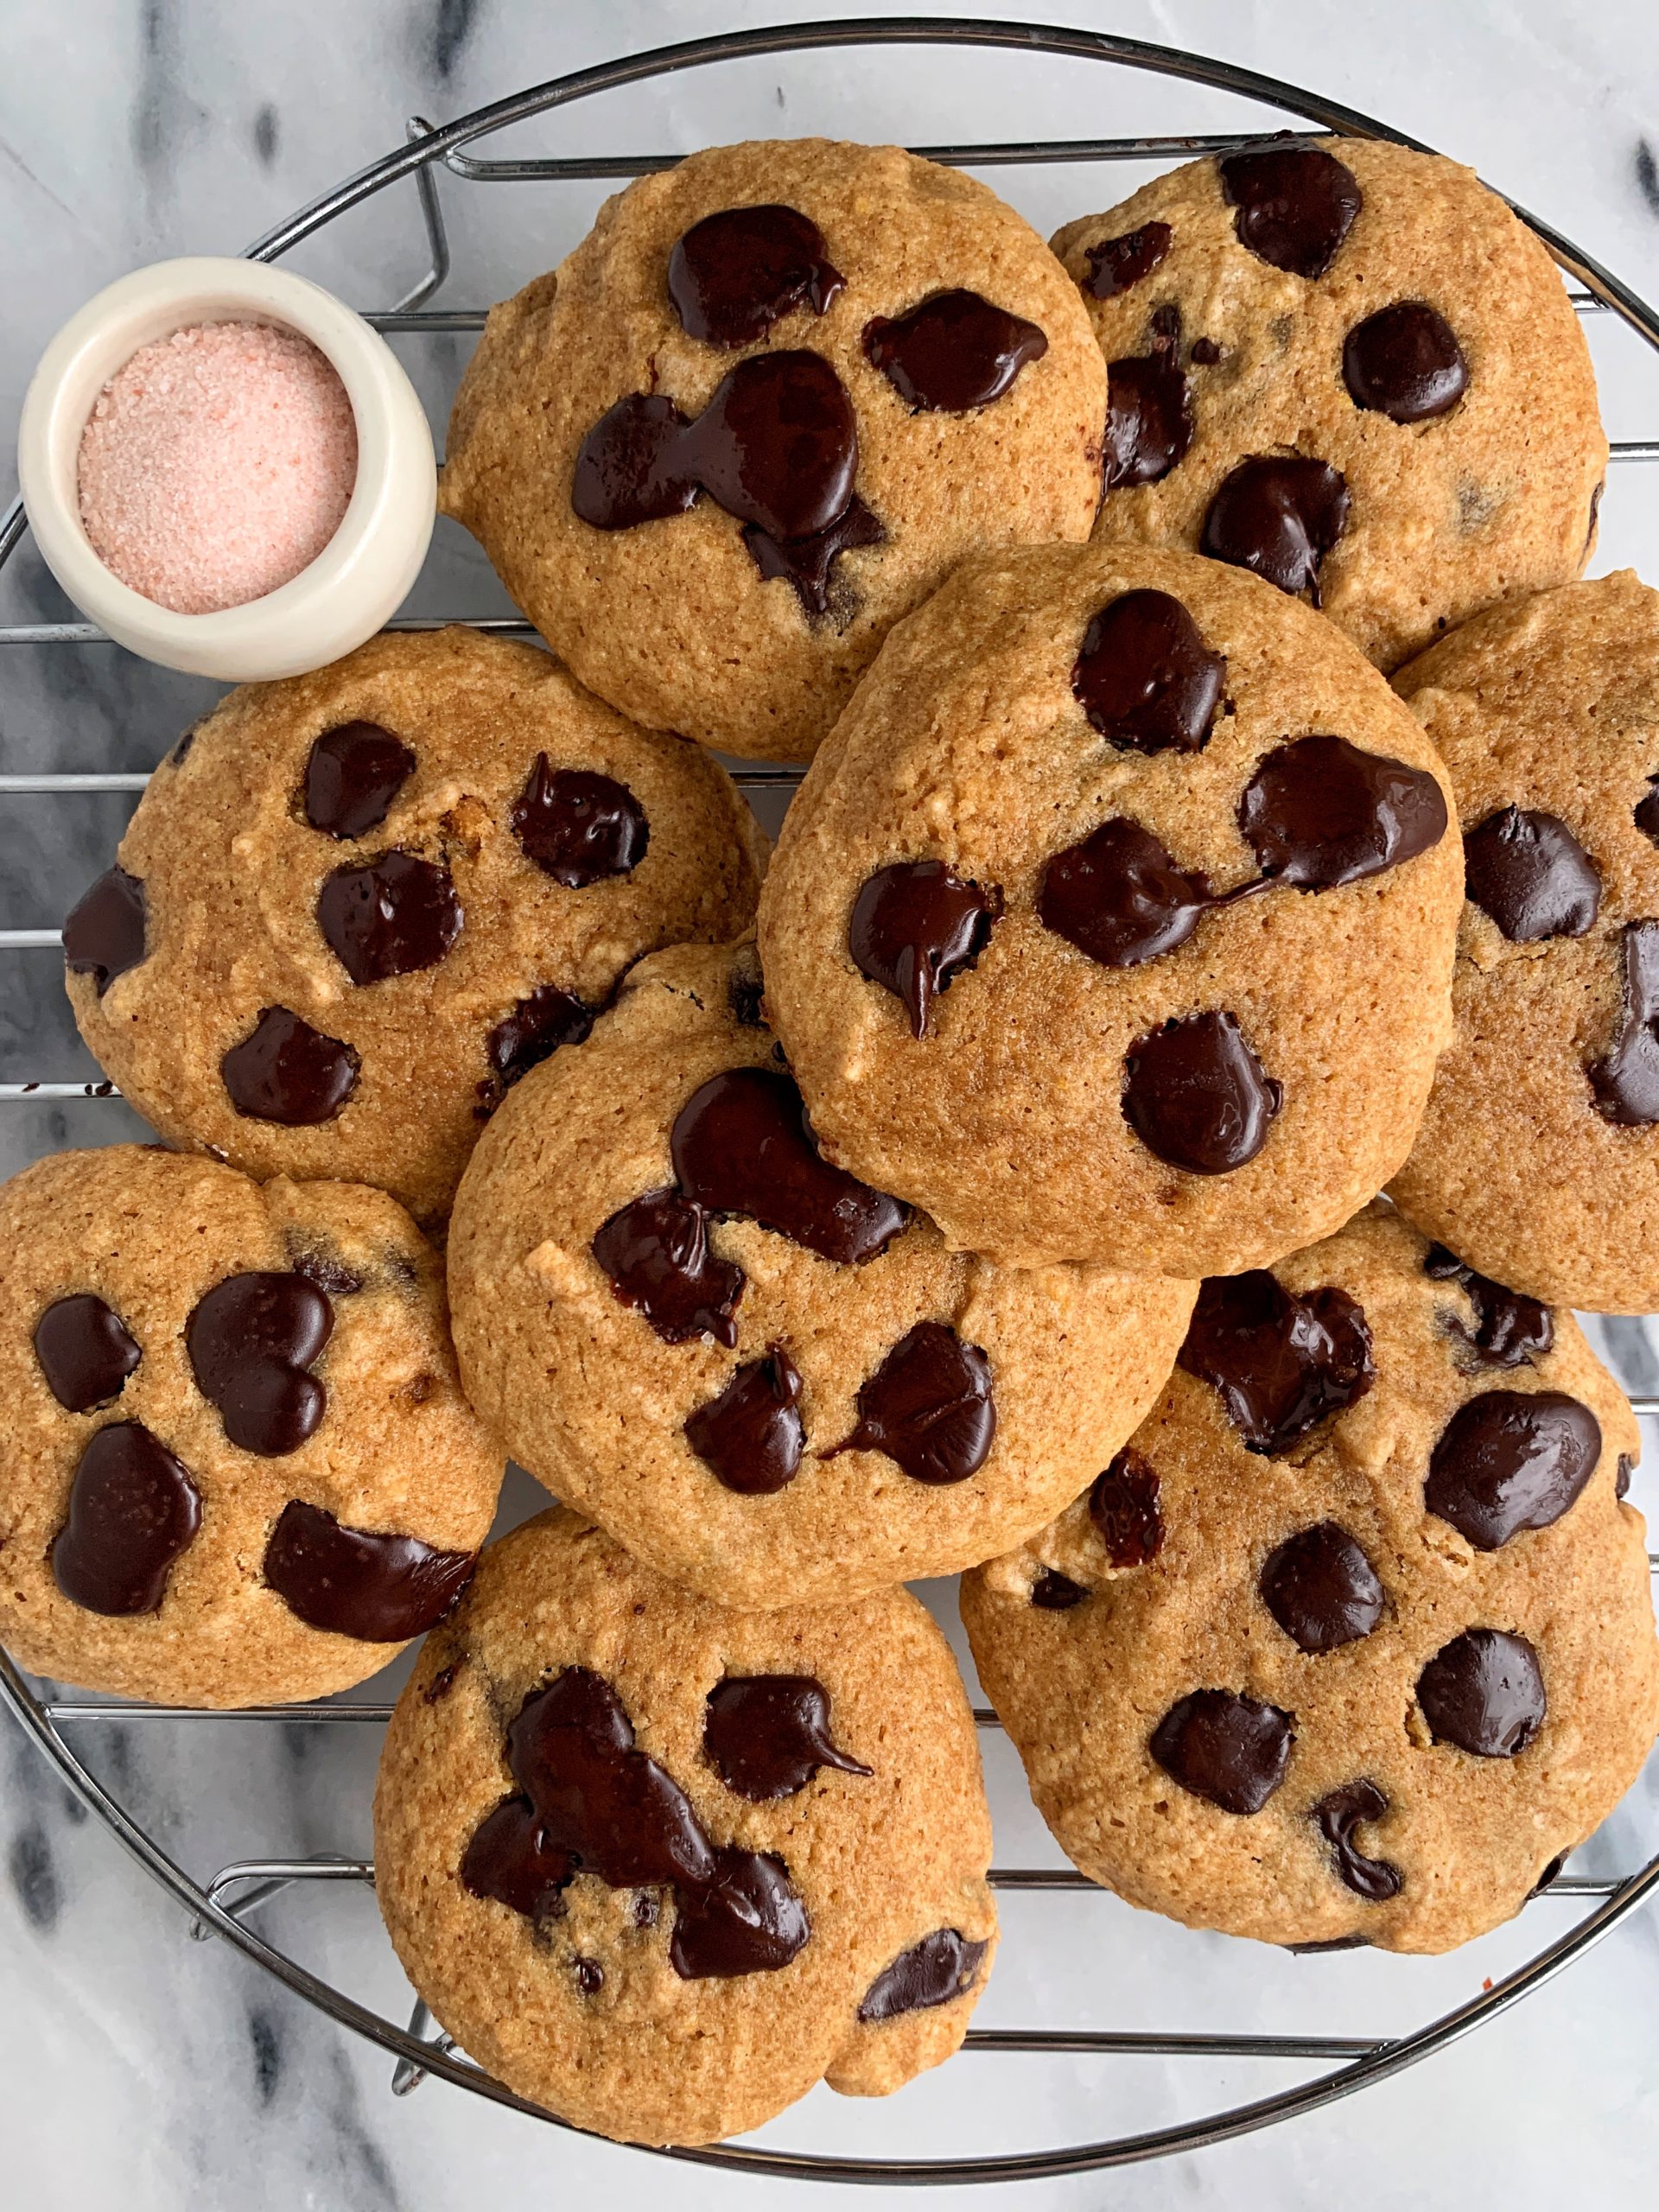 Gluten-free Chocolate Chip Olive Oil Cookies made with only 6 key ingredients. These delicious and healthier cookies are nut-free and made with gluten-free oat flour, sweetened with coconut sugar and maple syrup and are ready in just 10 minutes!